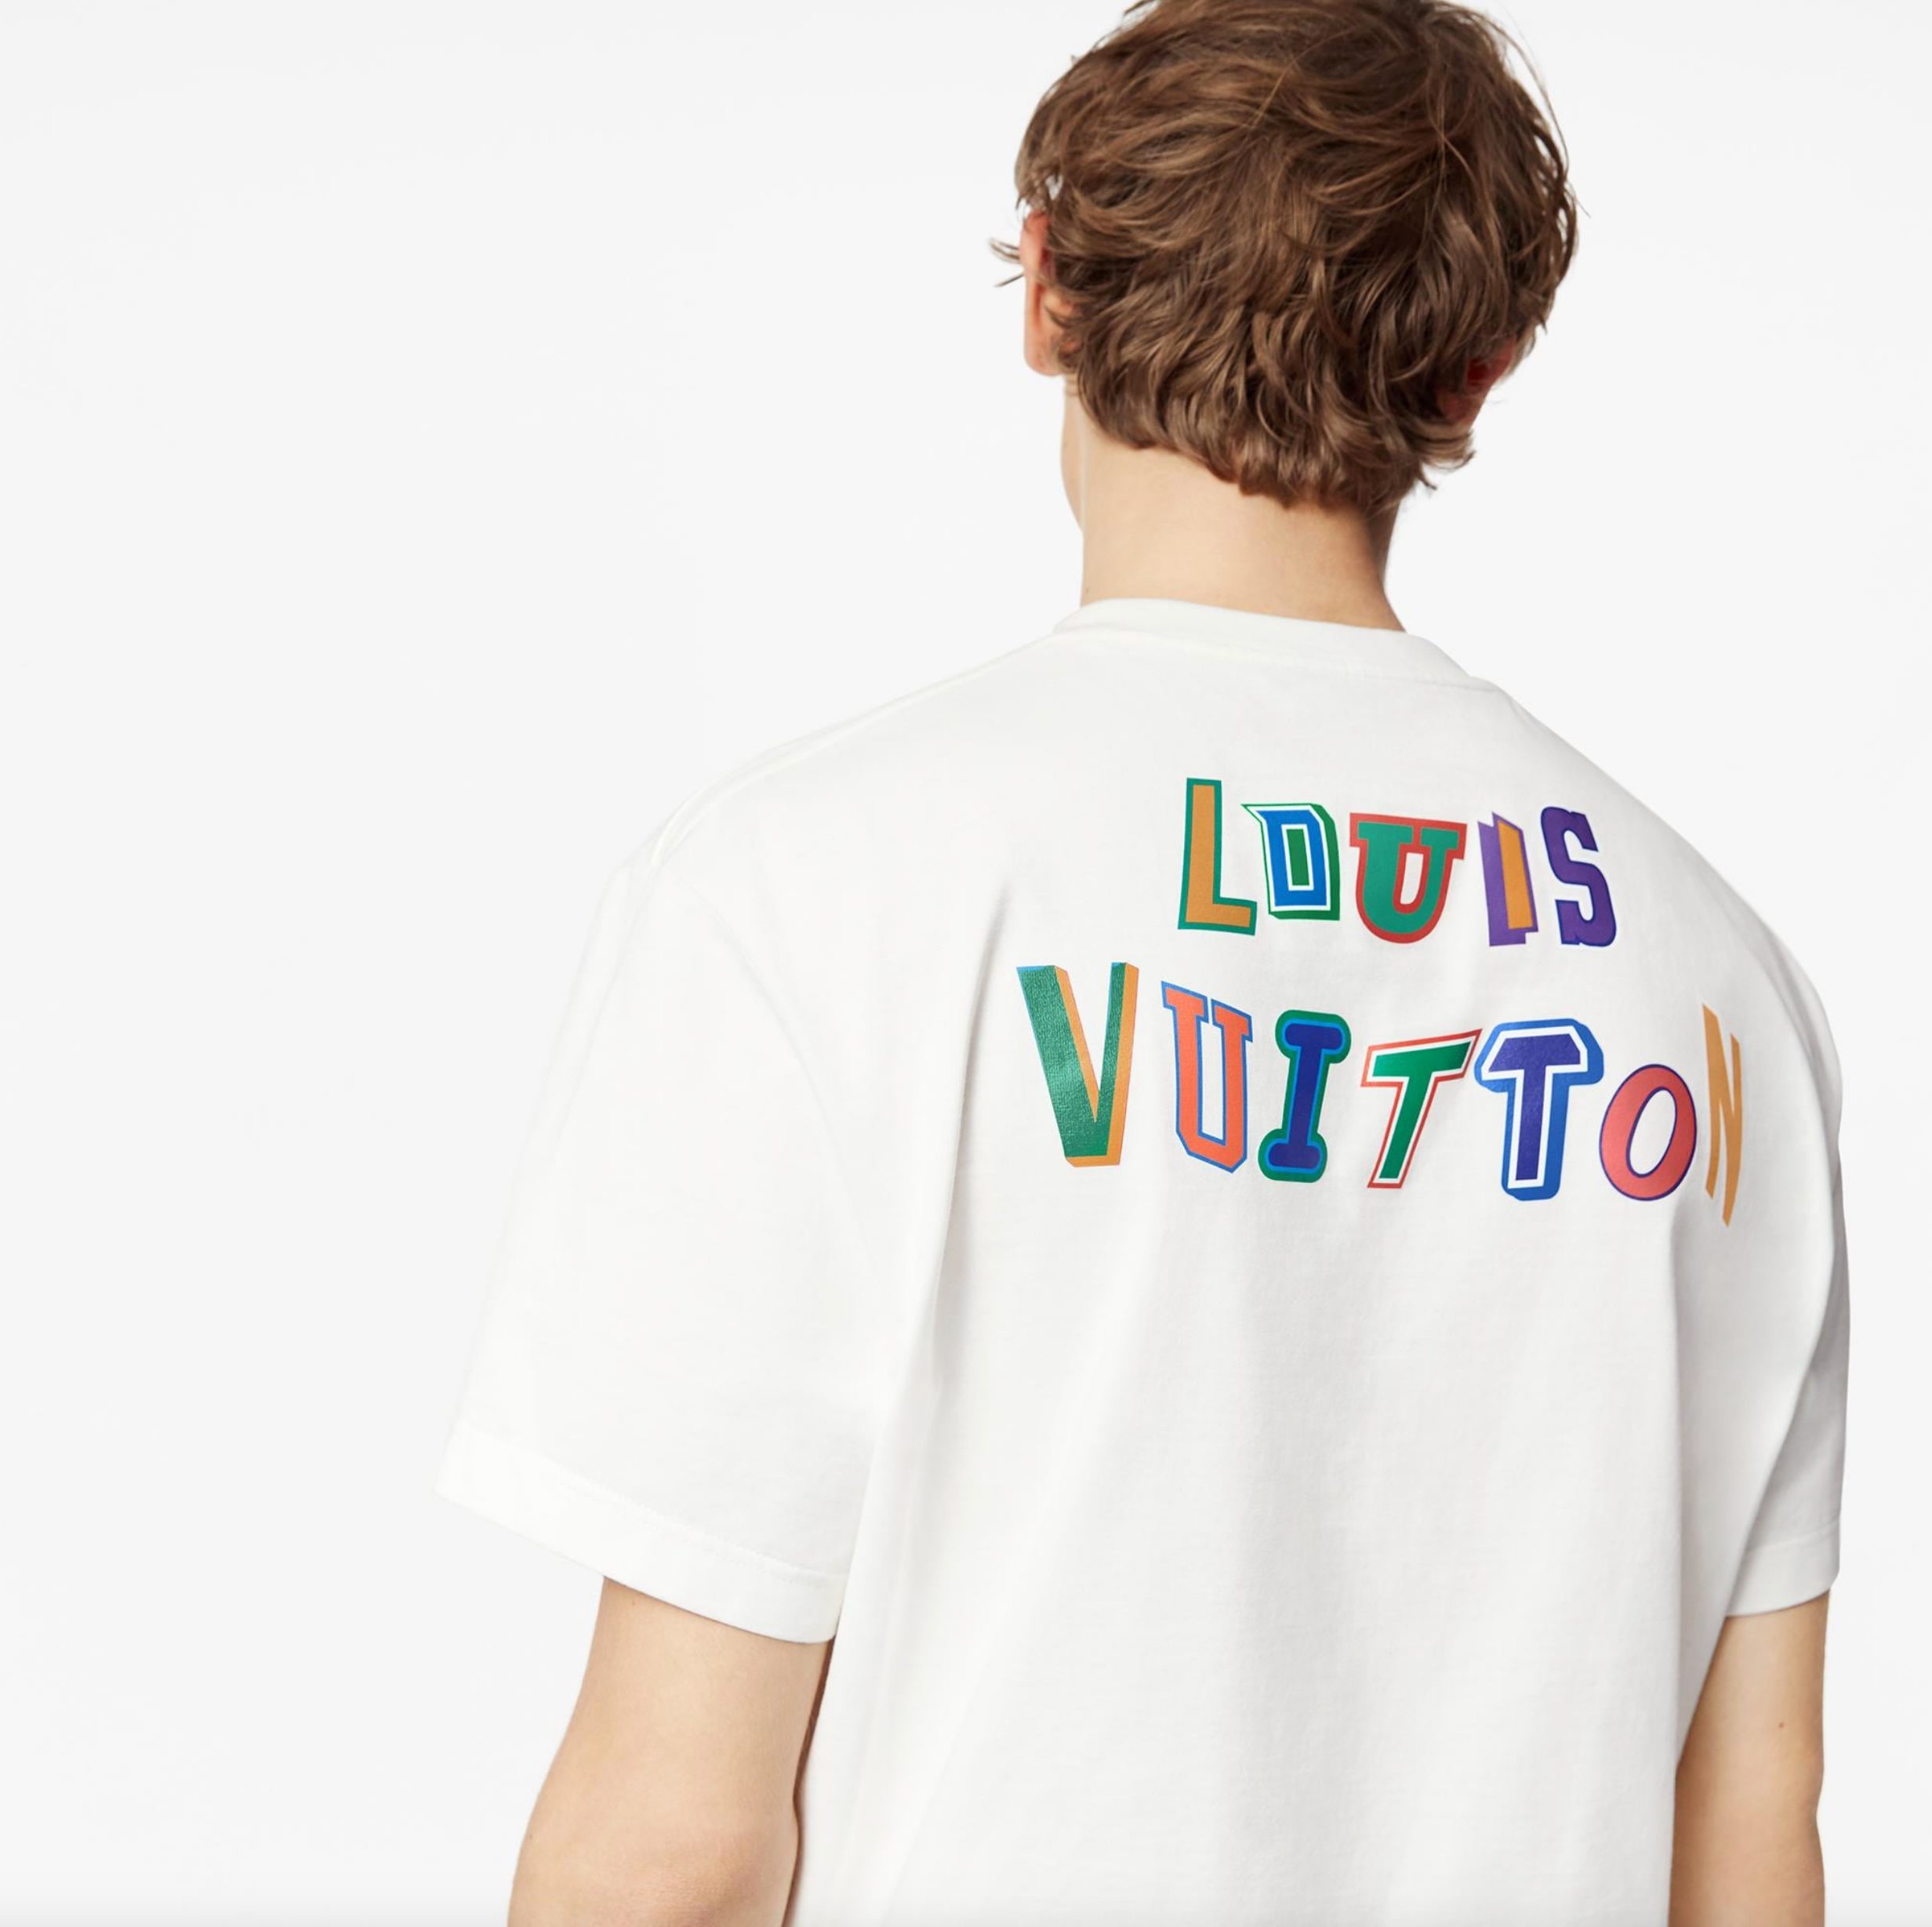 Louis Vuitton x NBA Basketball T-Shirt 'White': Luxurious Sportswear Made  in Italy – The Gallery Boutique